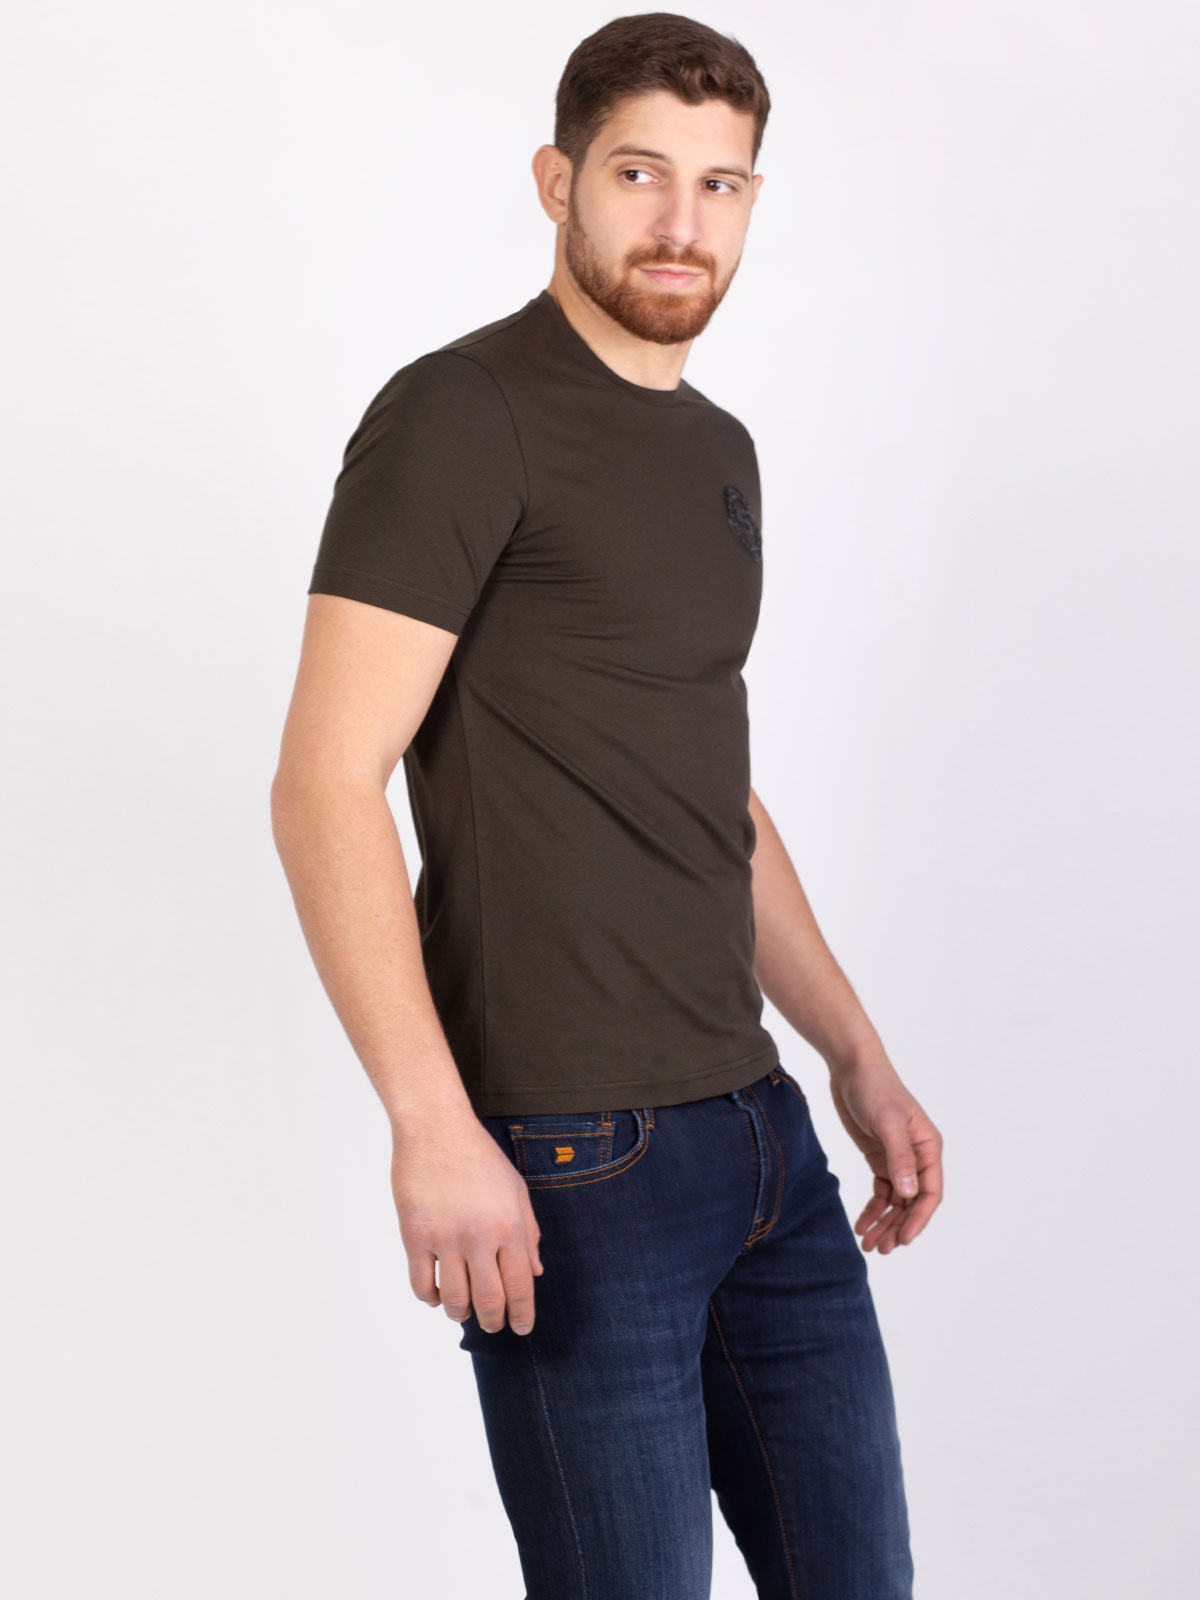 Tshirt in dark green with a round patch - 96385 € 11.81 img2